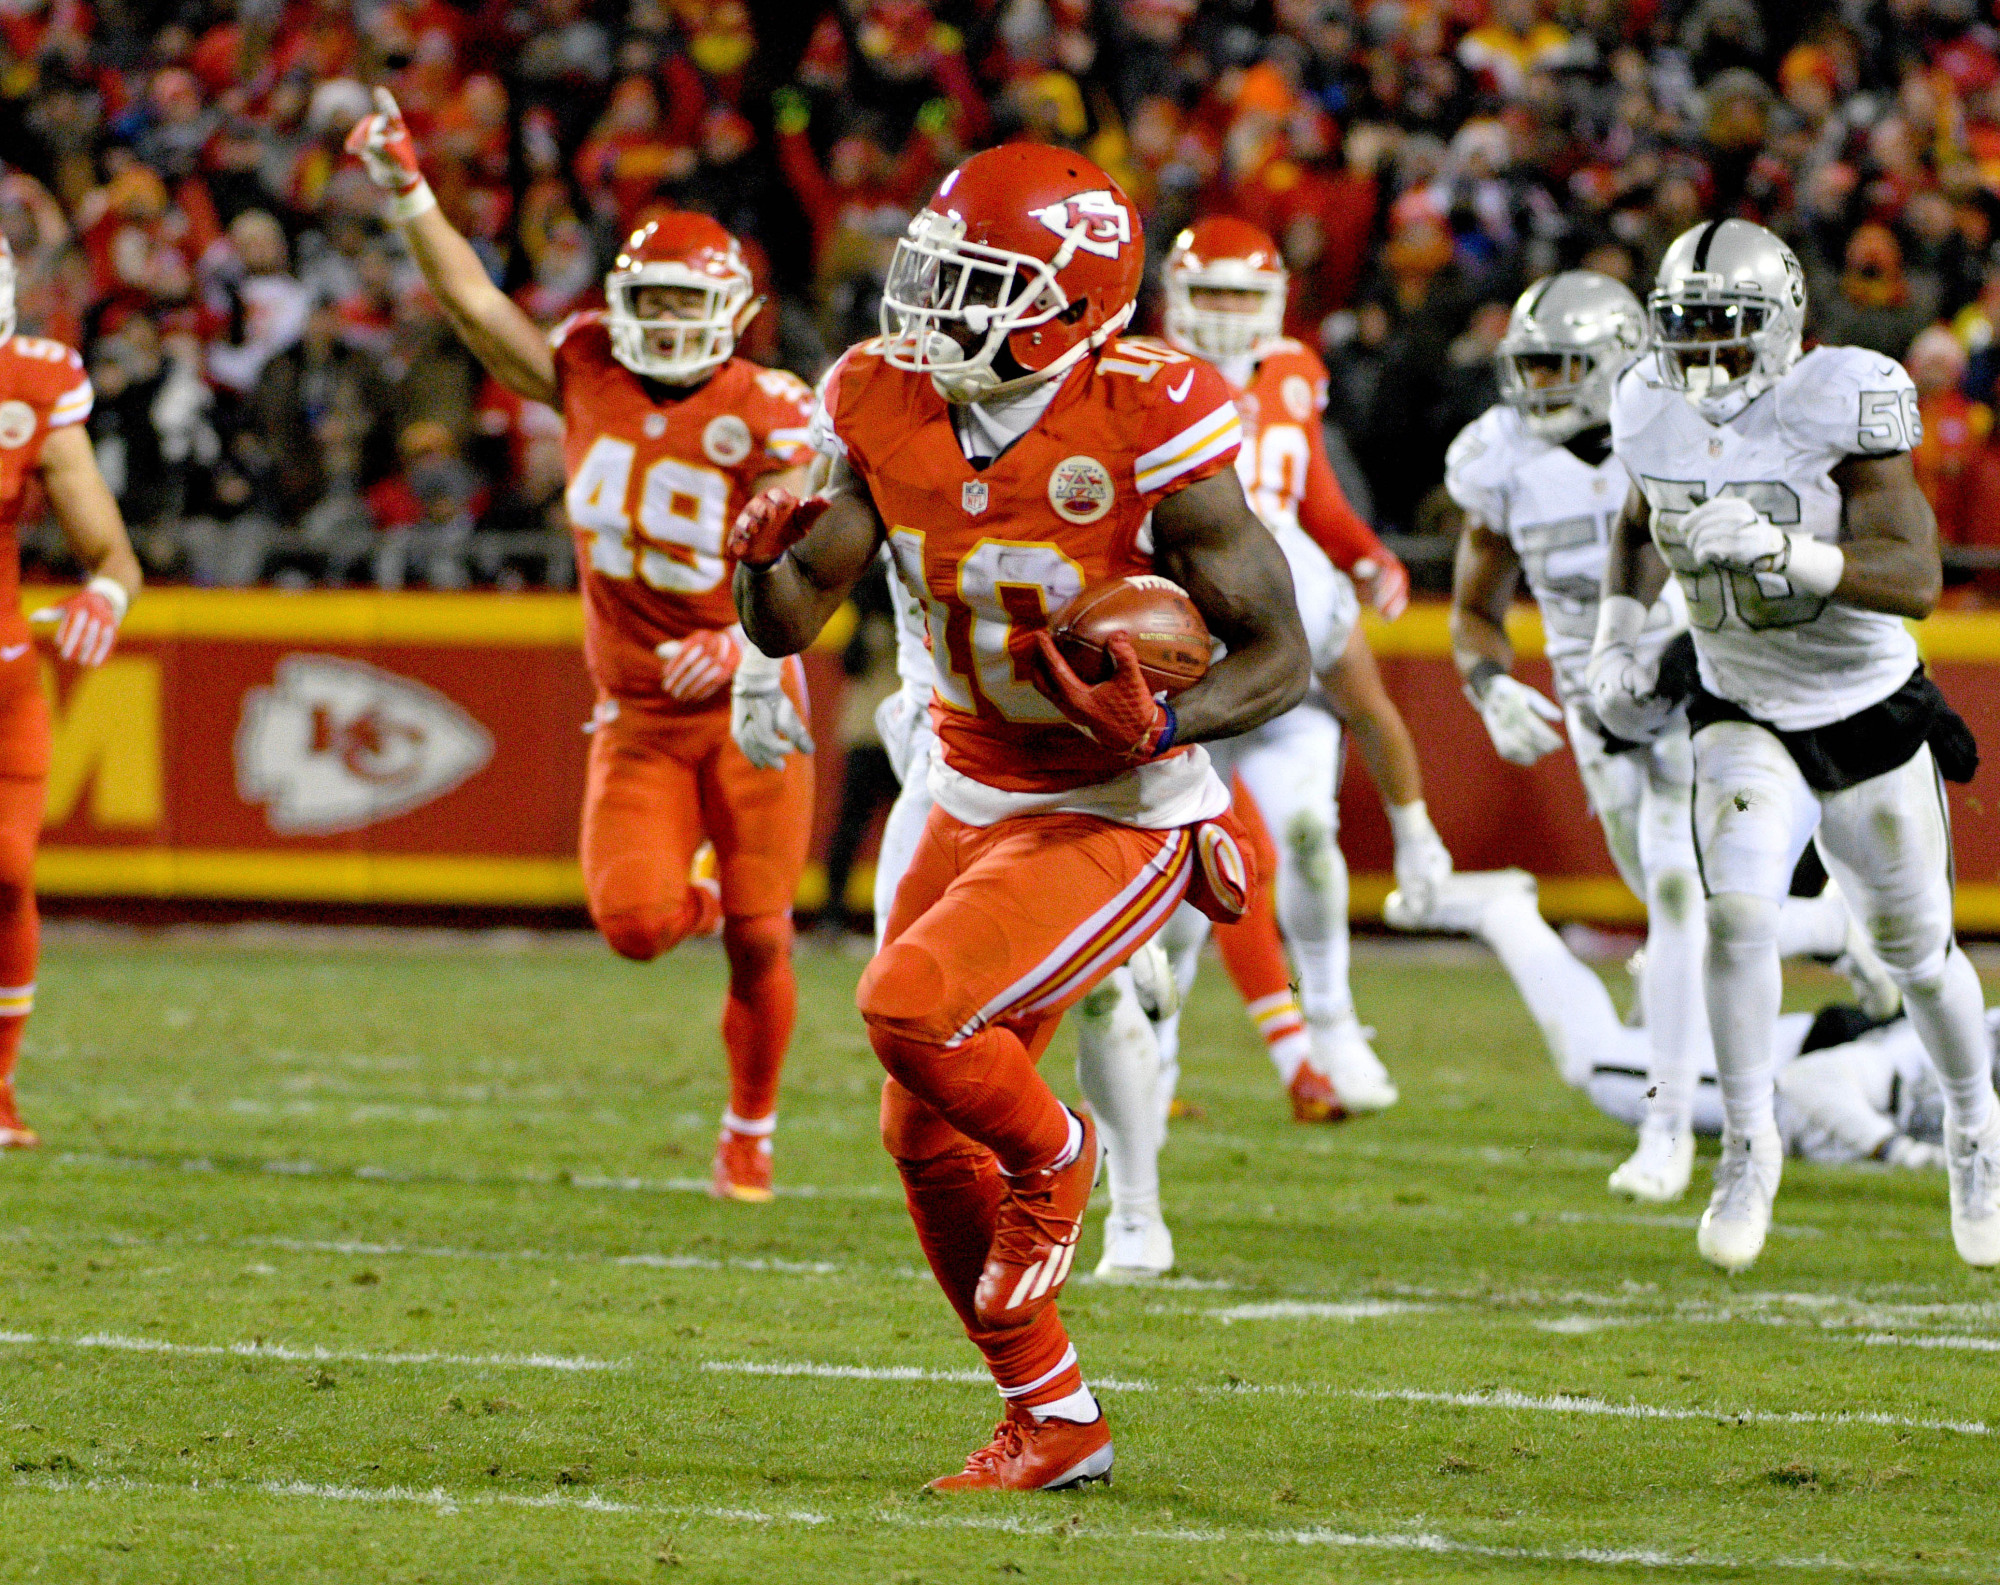 Chiefs hold off Raiders, move into first place in AFC West | The Japan Times